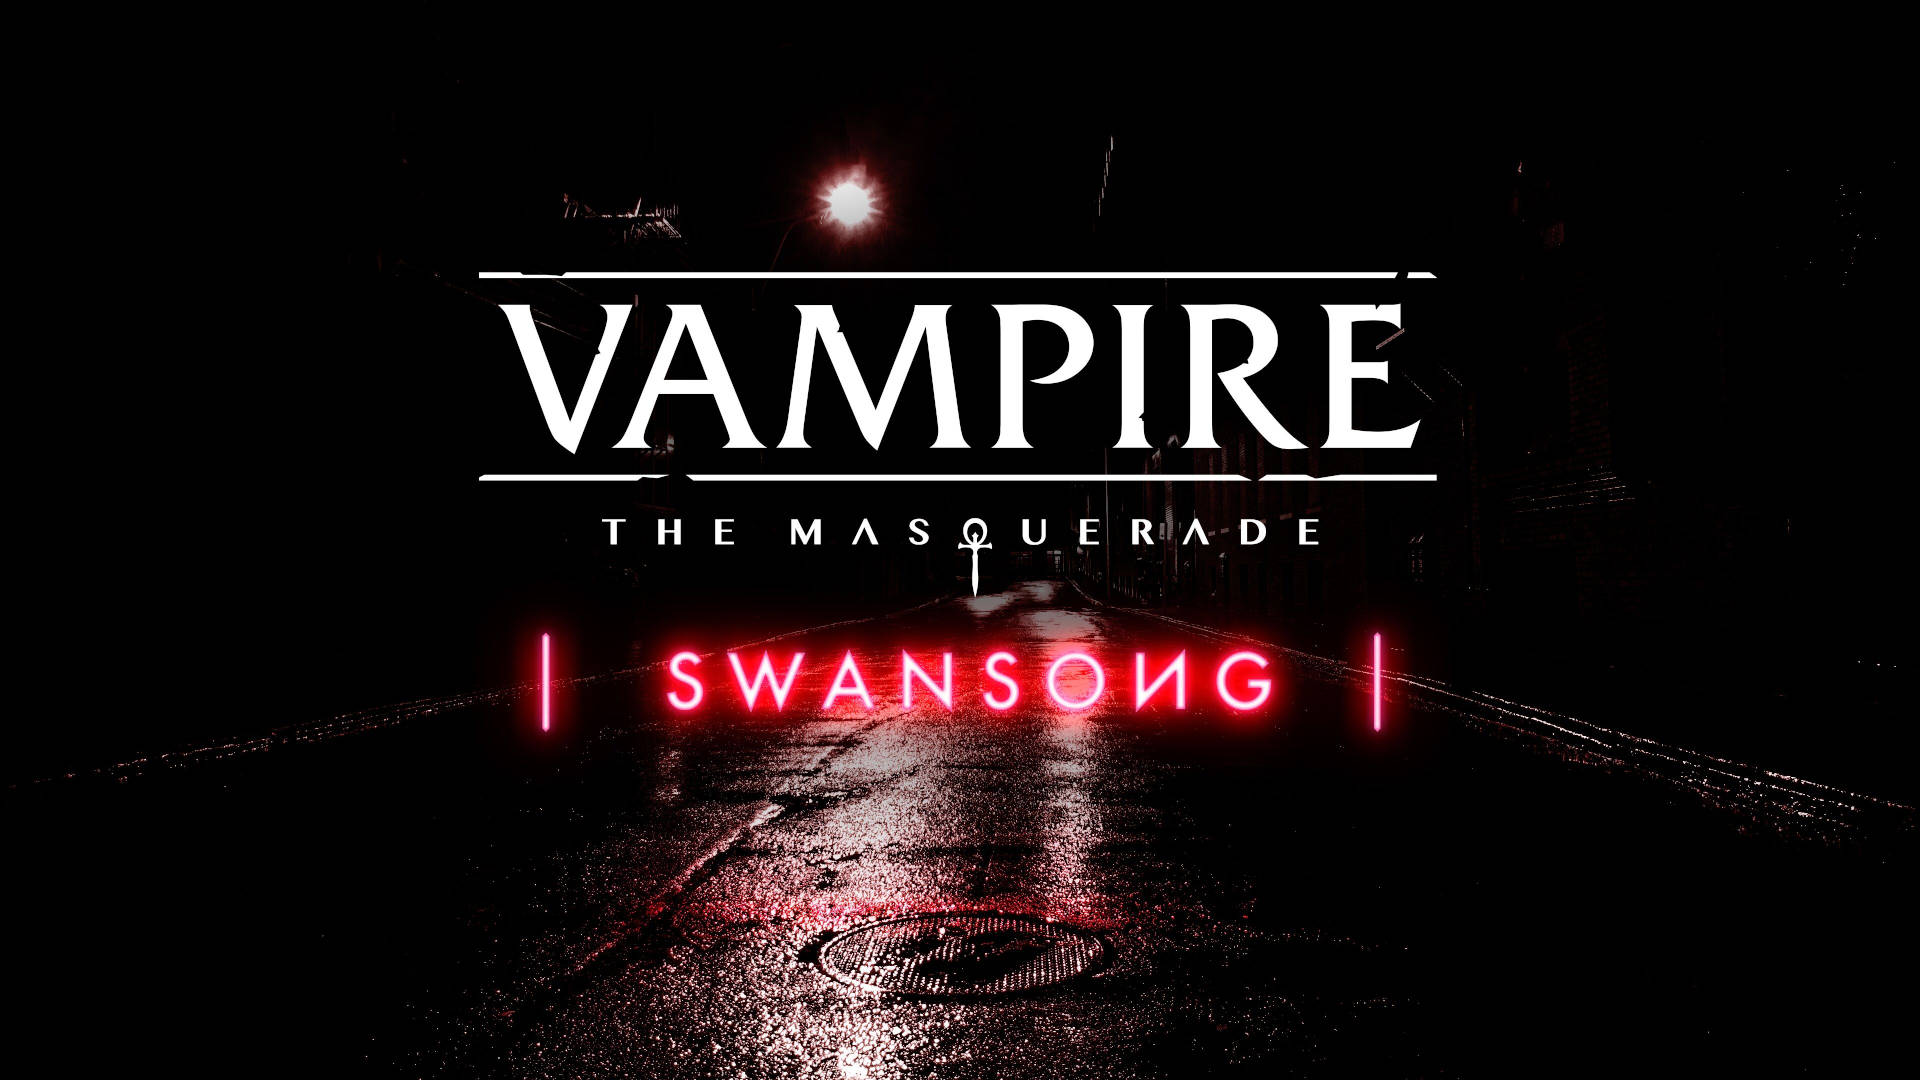  Vampire: The Masquerade - Swansong (PS4) & The Quarry